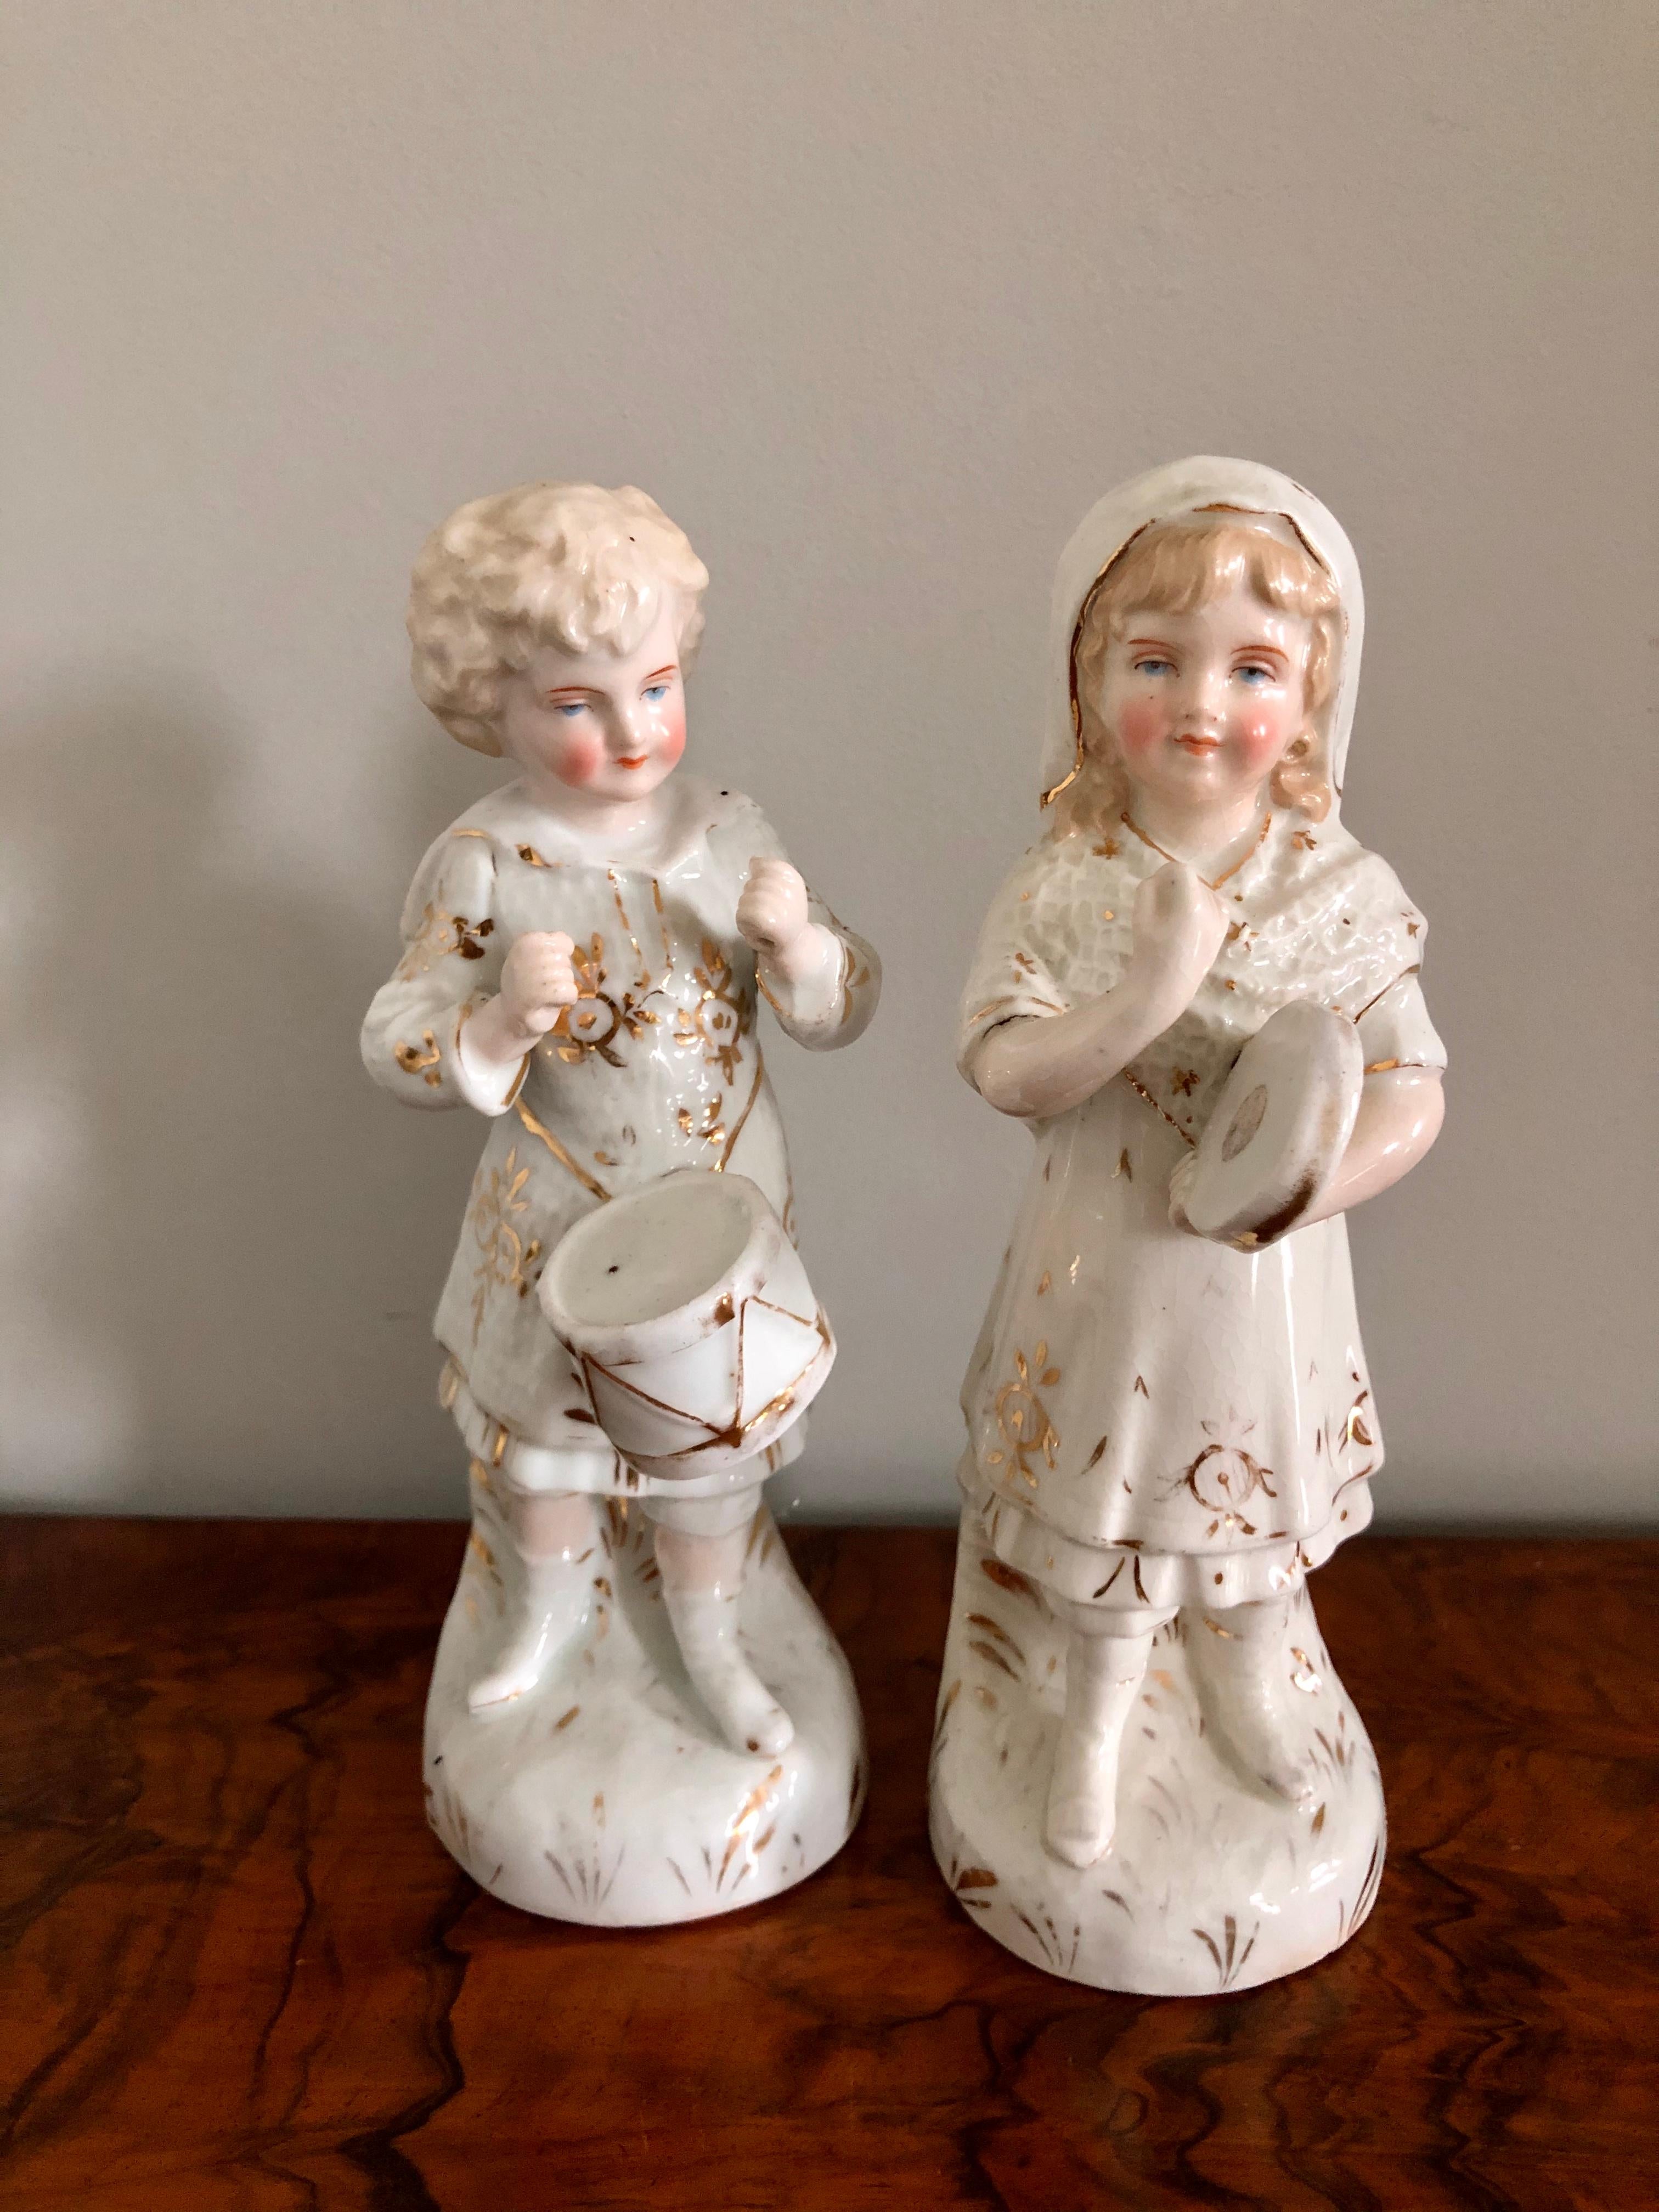 Set of 24 antique continental porcelain figurines in period costumes with delightful hand painted gold colour decoration, some with musical instruments and all standing on a shaped base. Made in Germany.

A very charming collection all in lovely